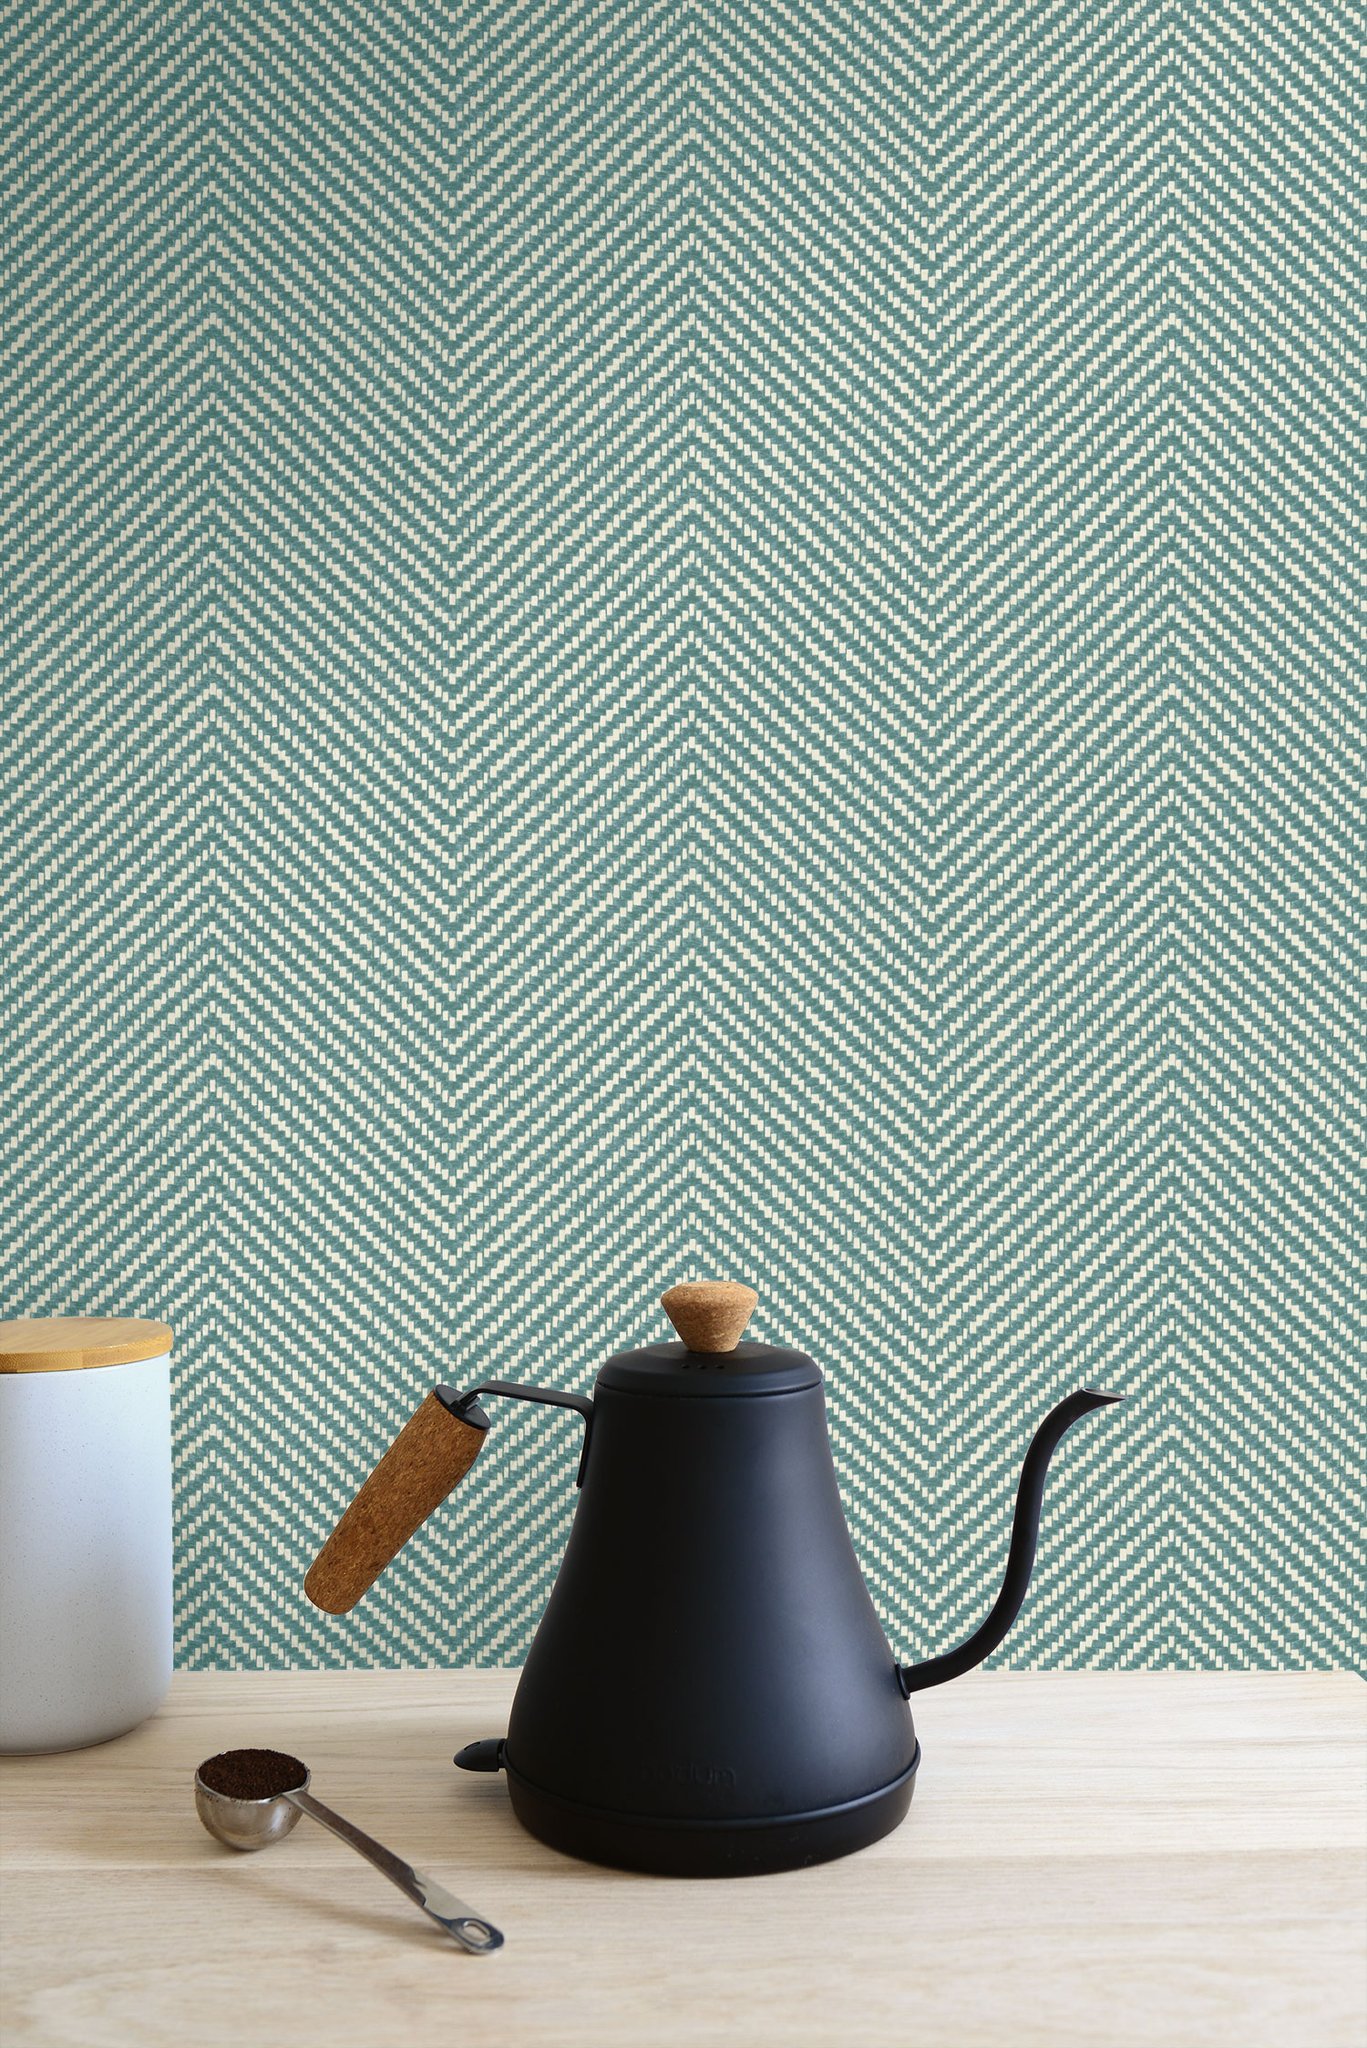 Cafe Chevron Wallpaper In Aqua From The More Textures Collection